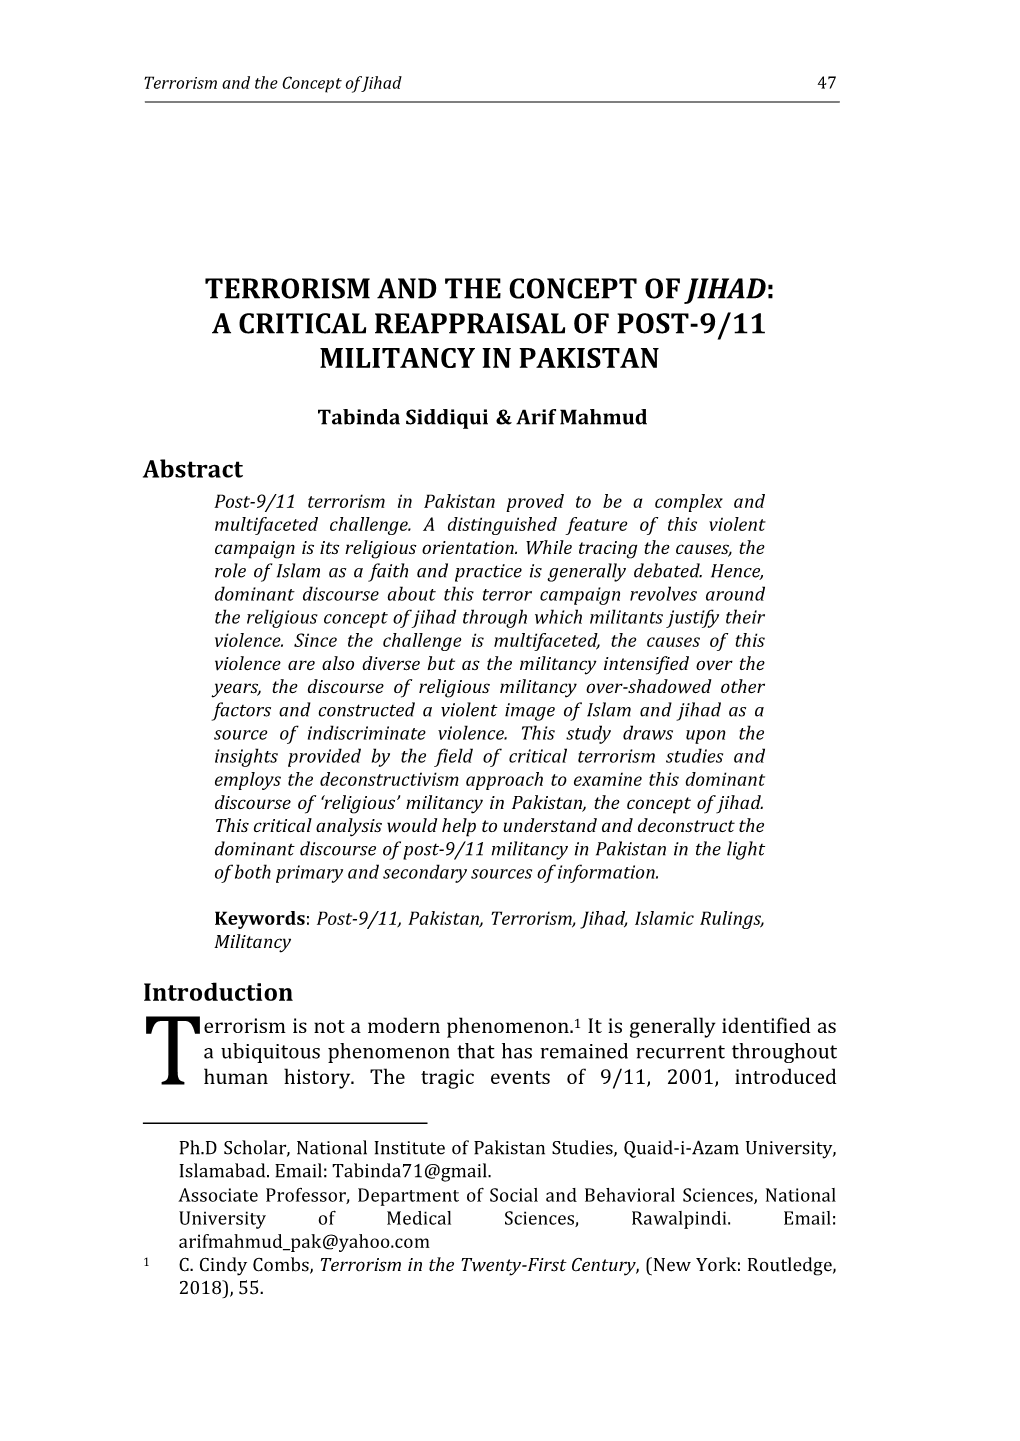 4. Terrorism and the Concept of Jihad